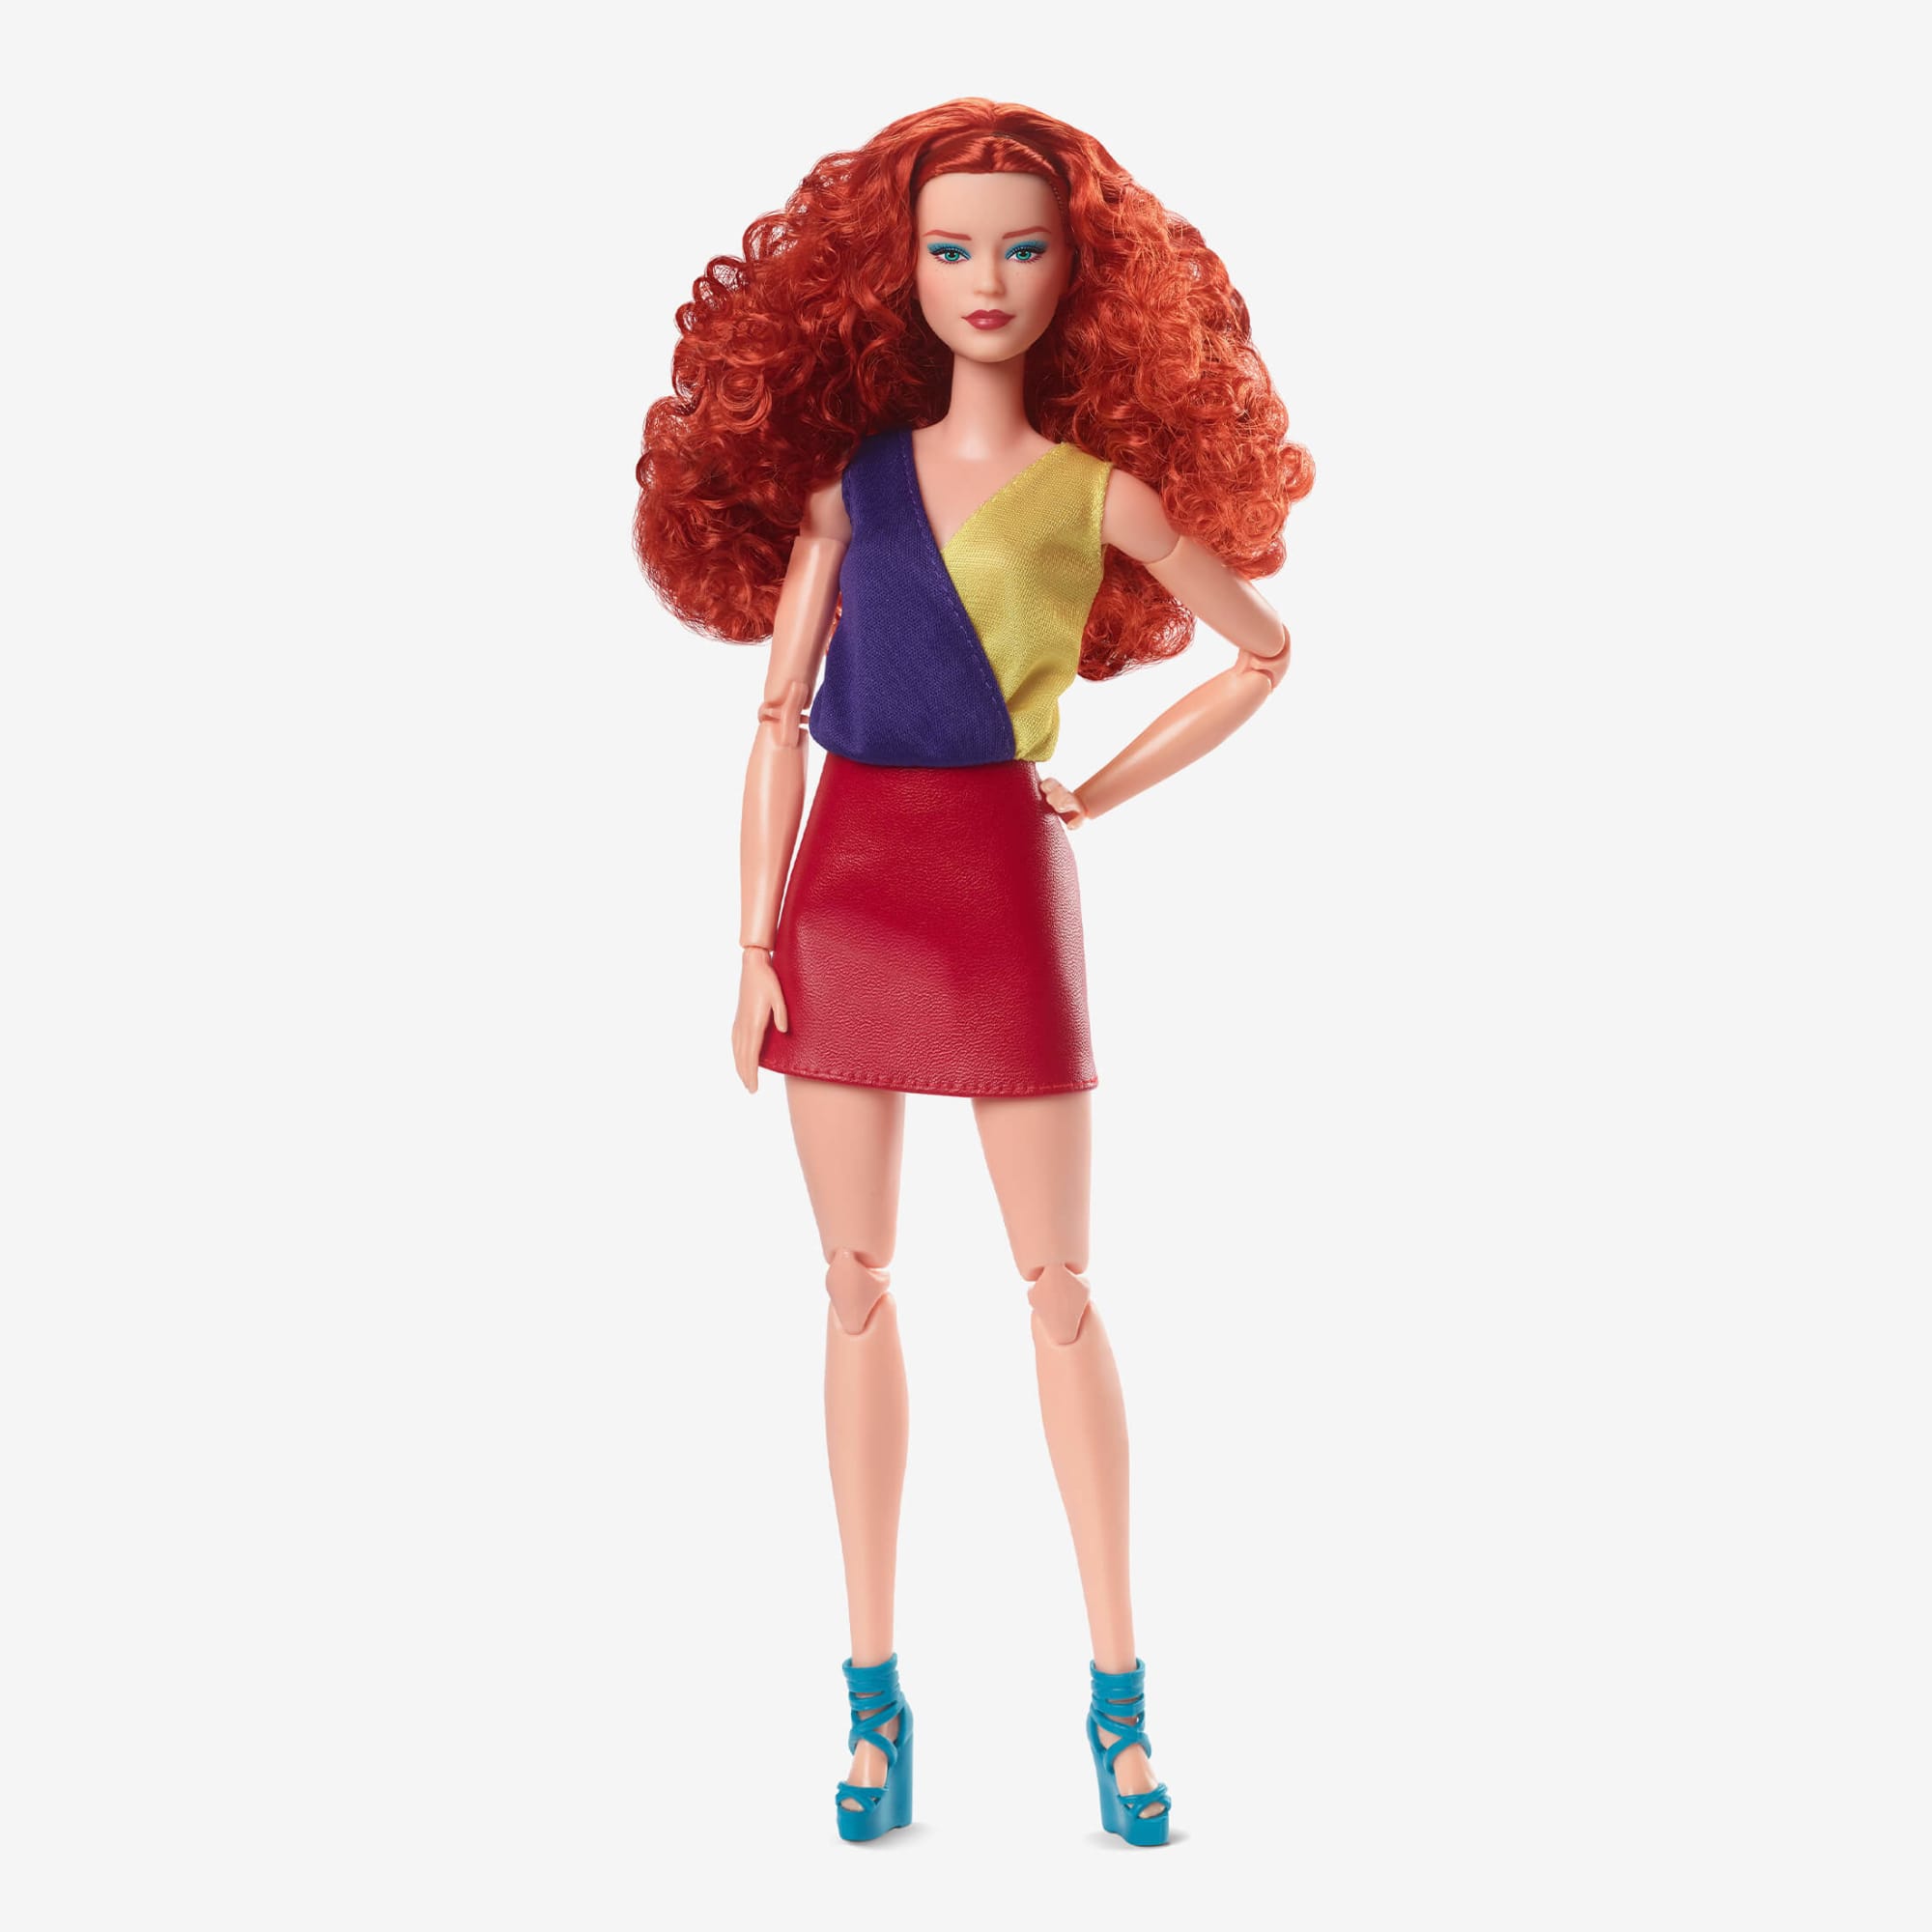 Barbie Made to Move Doll Red Hair 